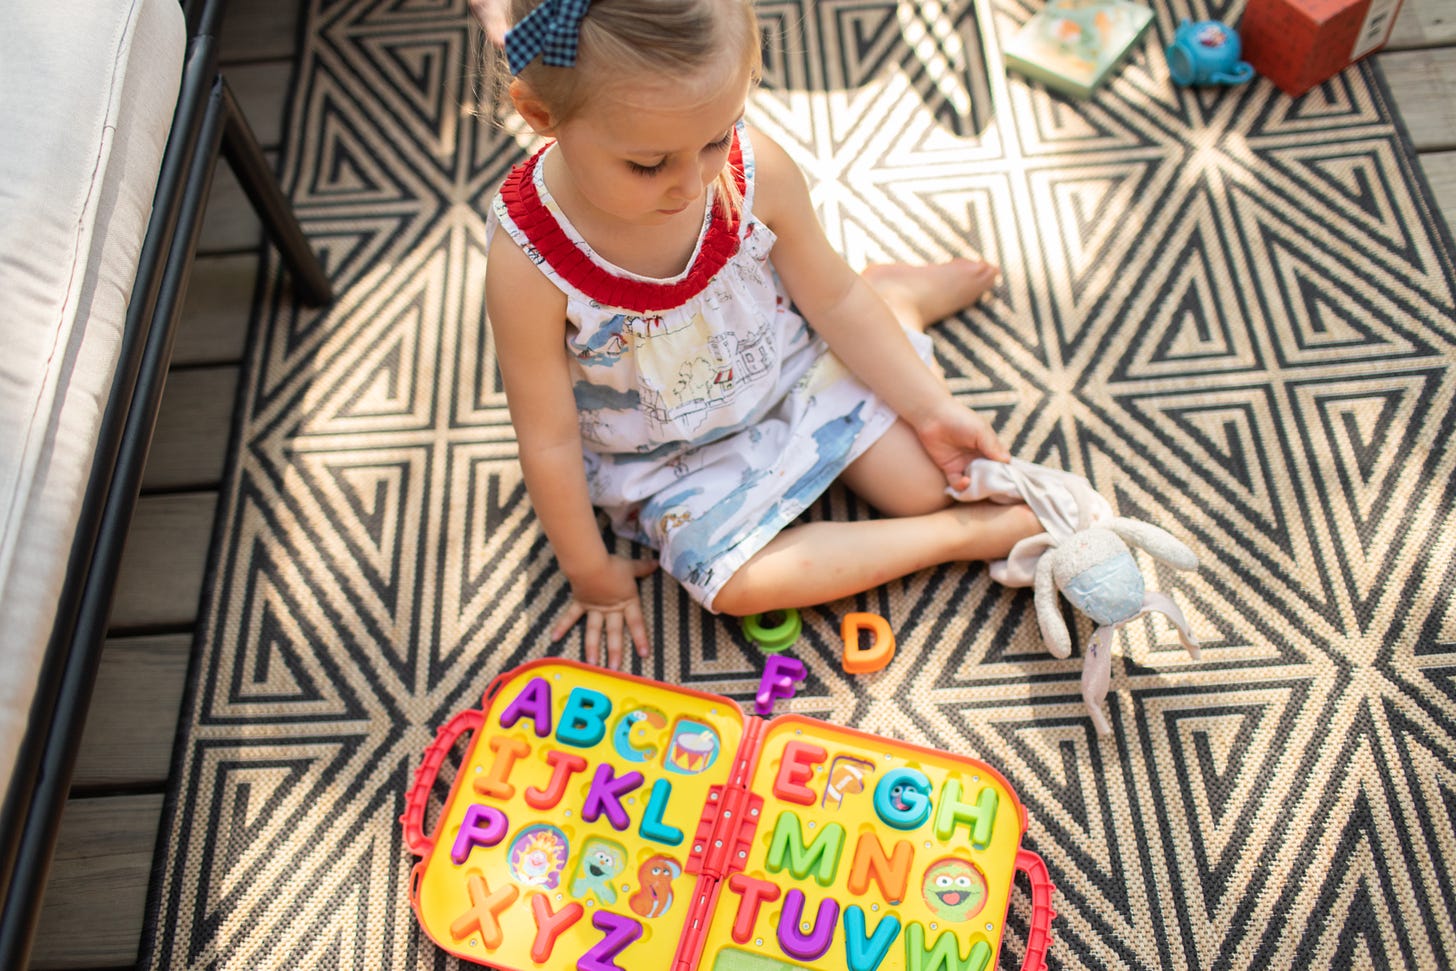 A child sits on an outdoor rug while holding a comfort item.